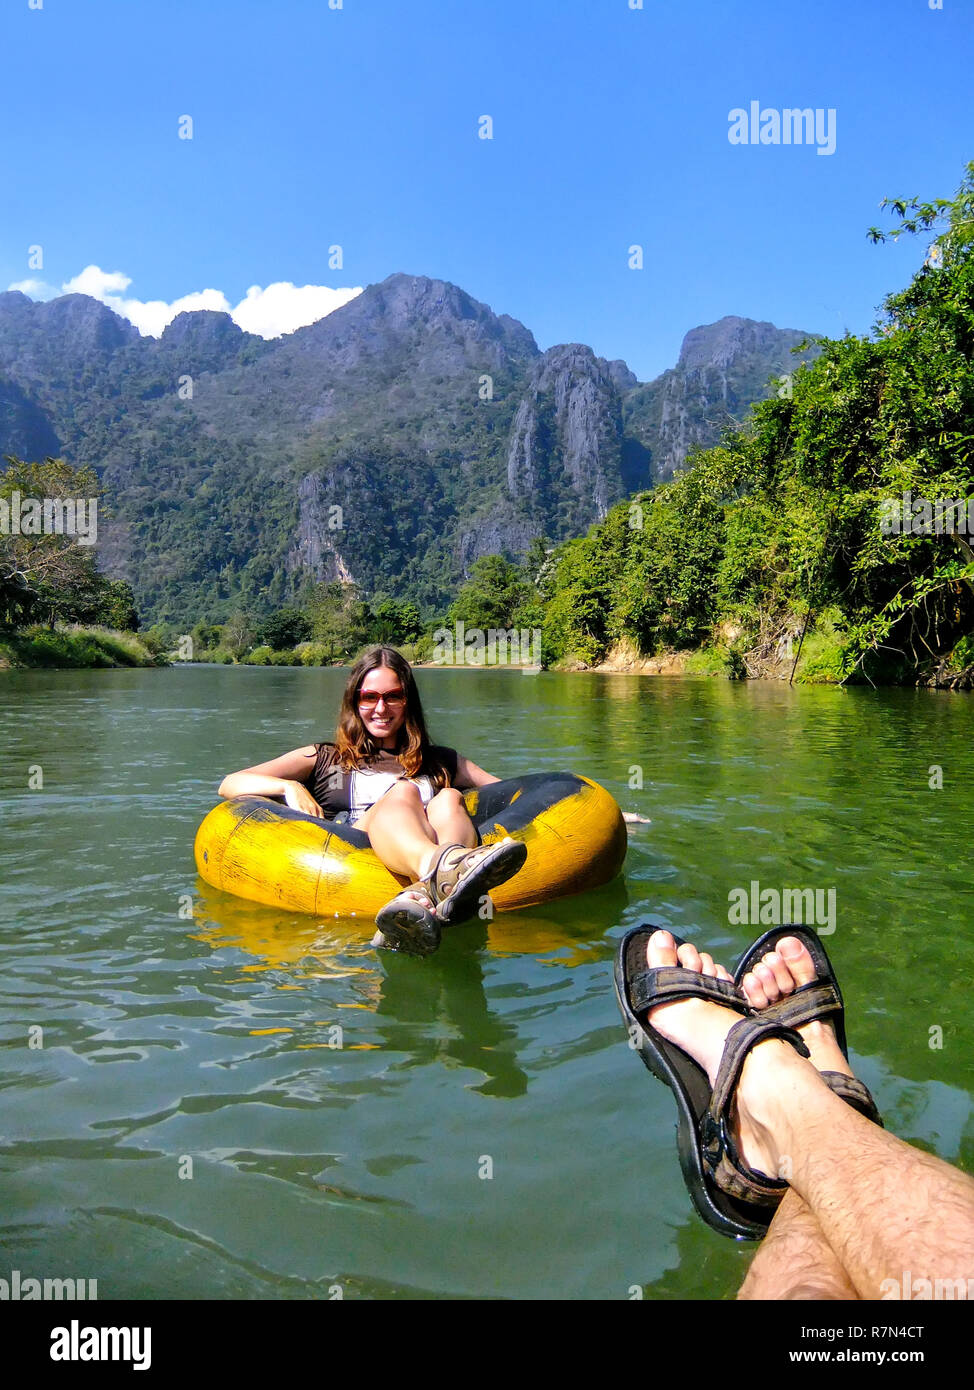 Couple going down Nam Song River in a tube surrounded by karst scenery in Vang Vieng, Laos. Tubing is a popular tourist activity in Vang Vieng. Stock Photo